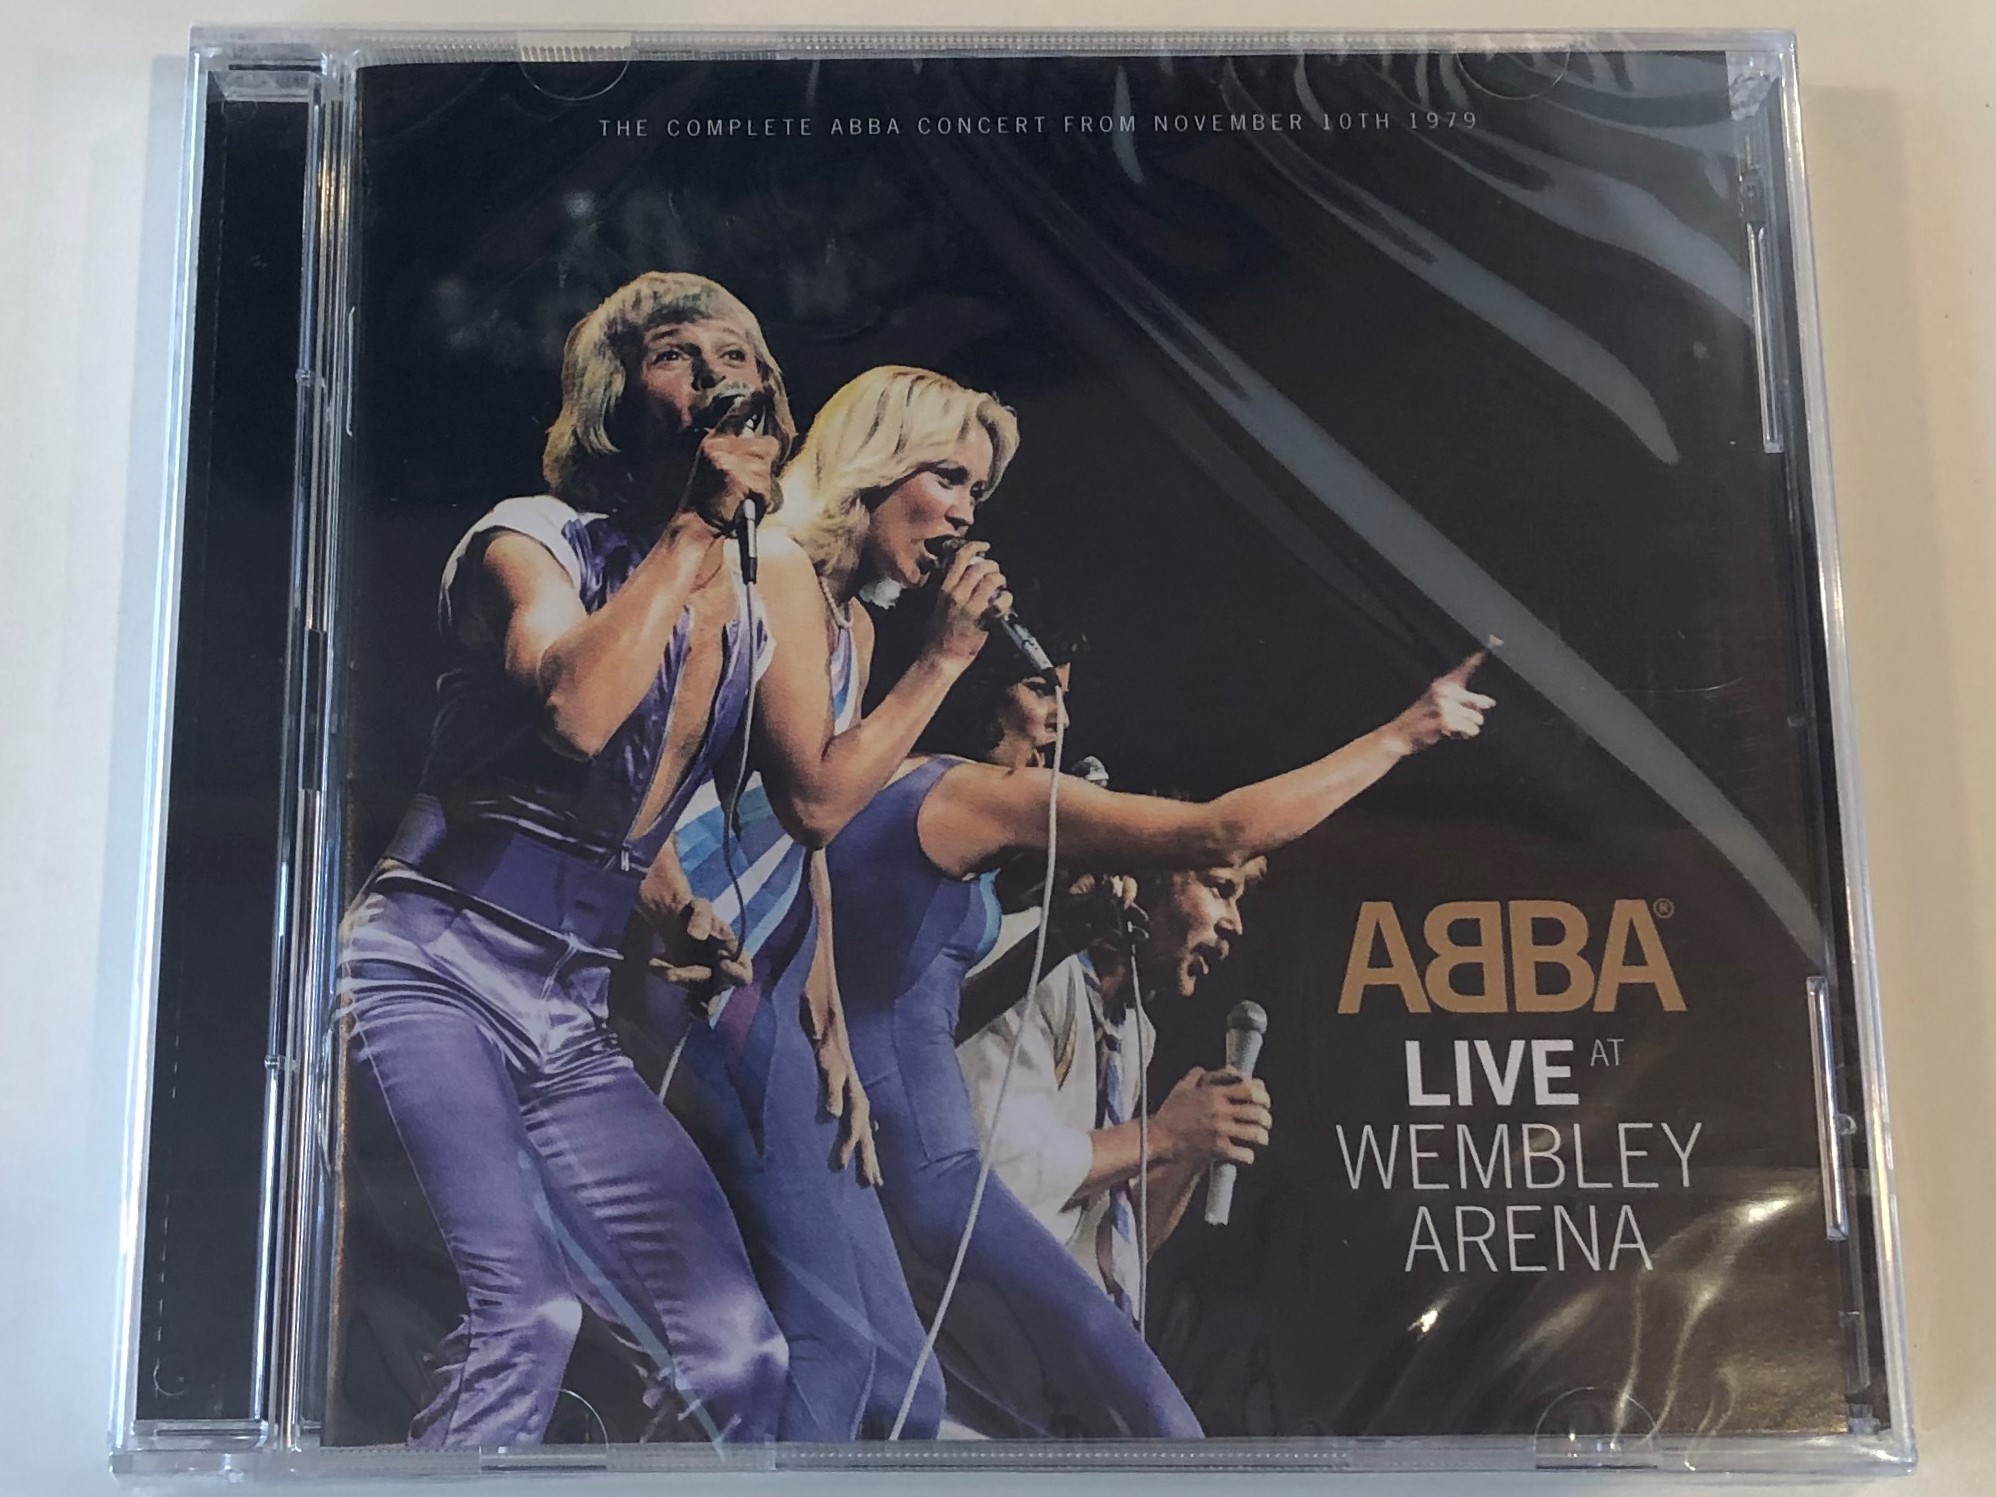 abba-live-at-wembley-arena-the-complete-abbaa-concert-from-november-10th-1979-polar-2x-audio-cd-2014-00602537928644-1-.jpg